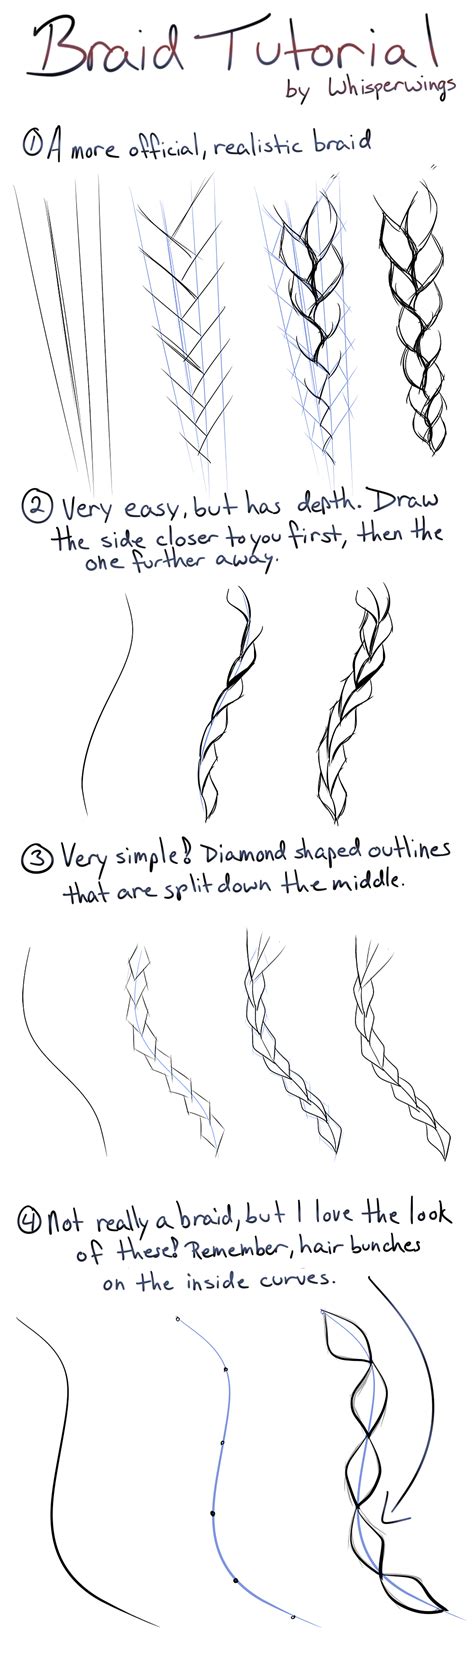 We'll go over the basics of braiding and put in some practice. Simple Braid Tutorial by Whisperwings on DeviantArt